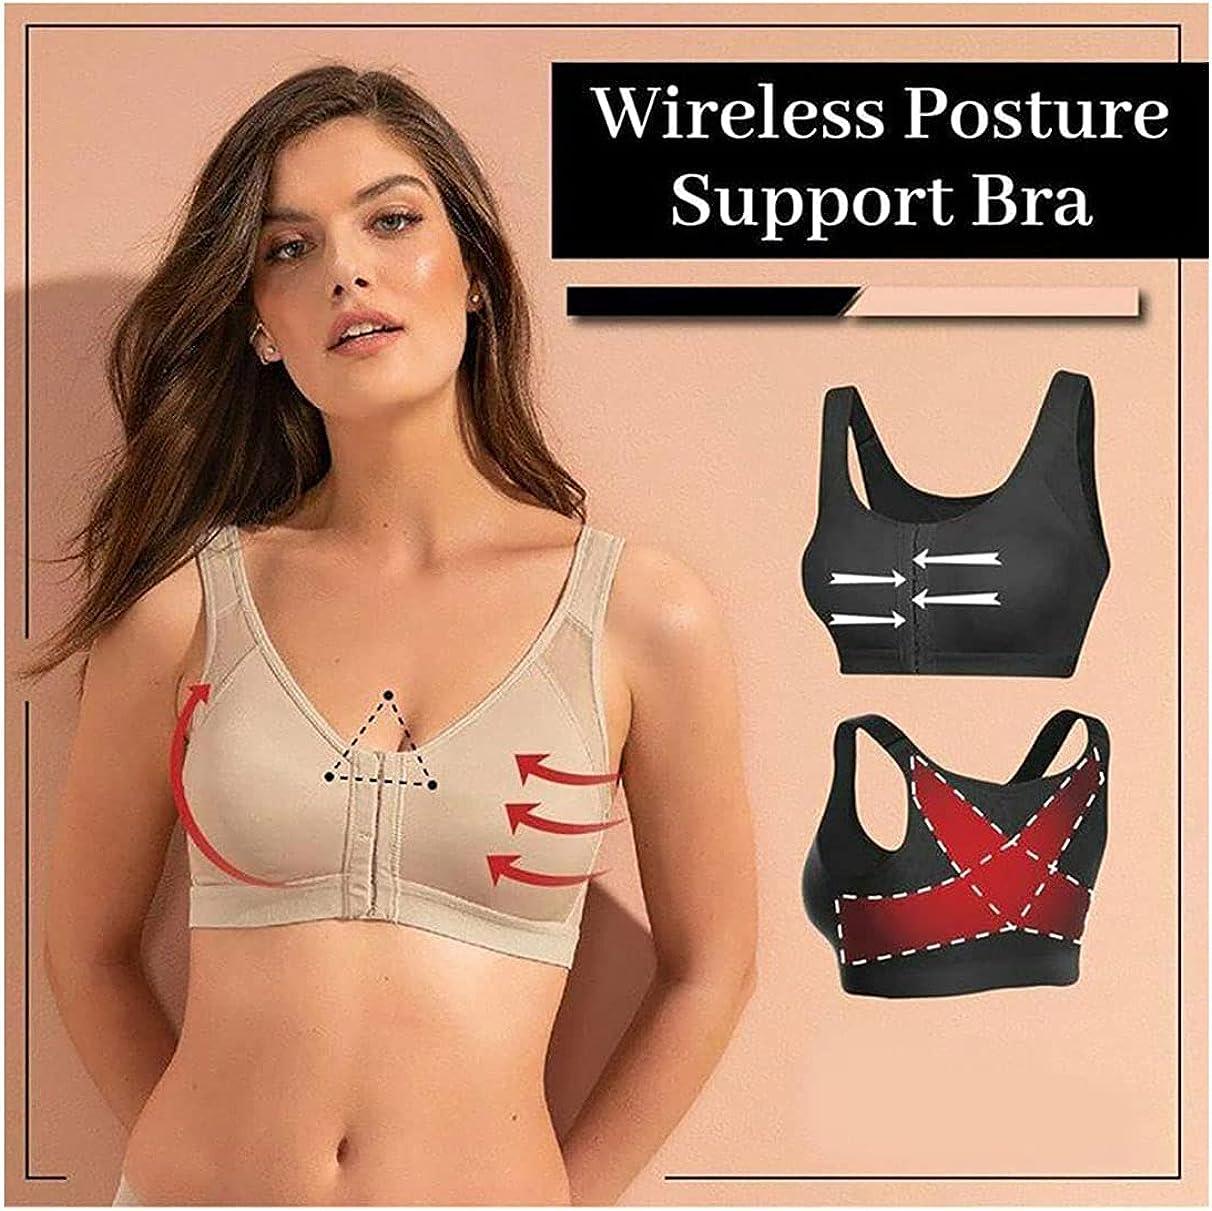 Womens Sports Yoga Fitness Bras Wire Free Thin Padded Underwear  Adjusted-Straps Casual Bra 